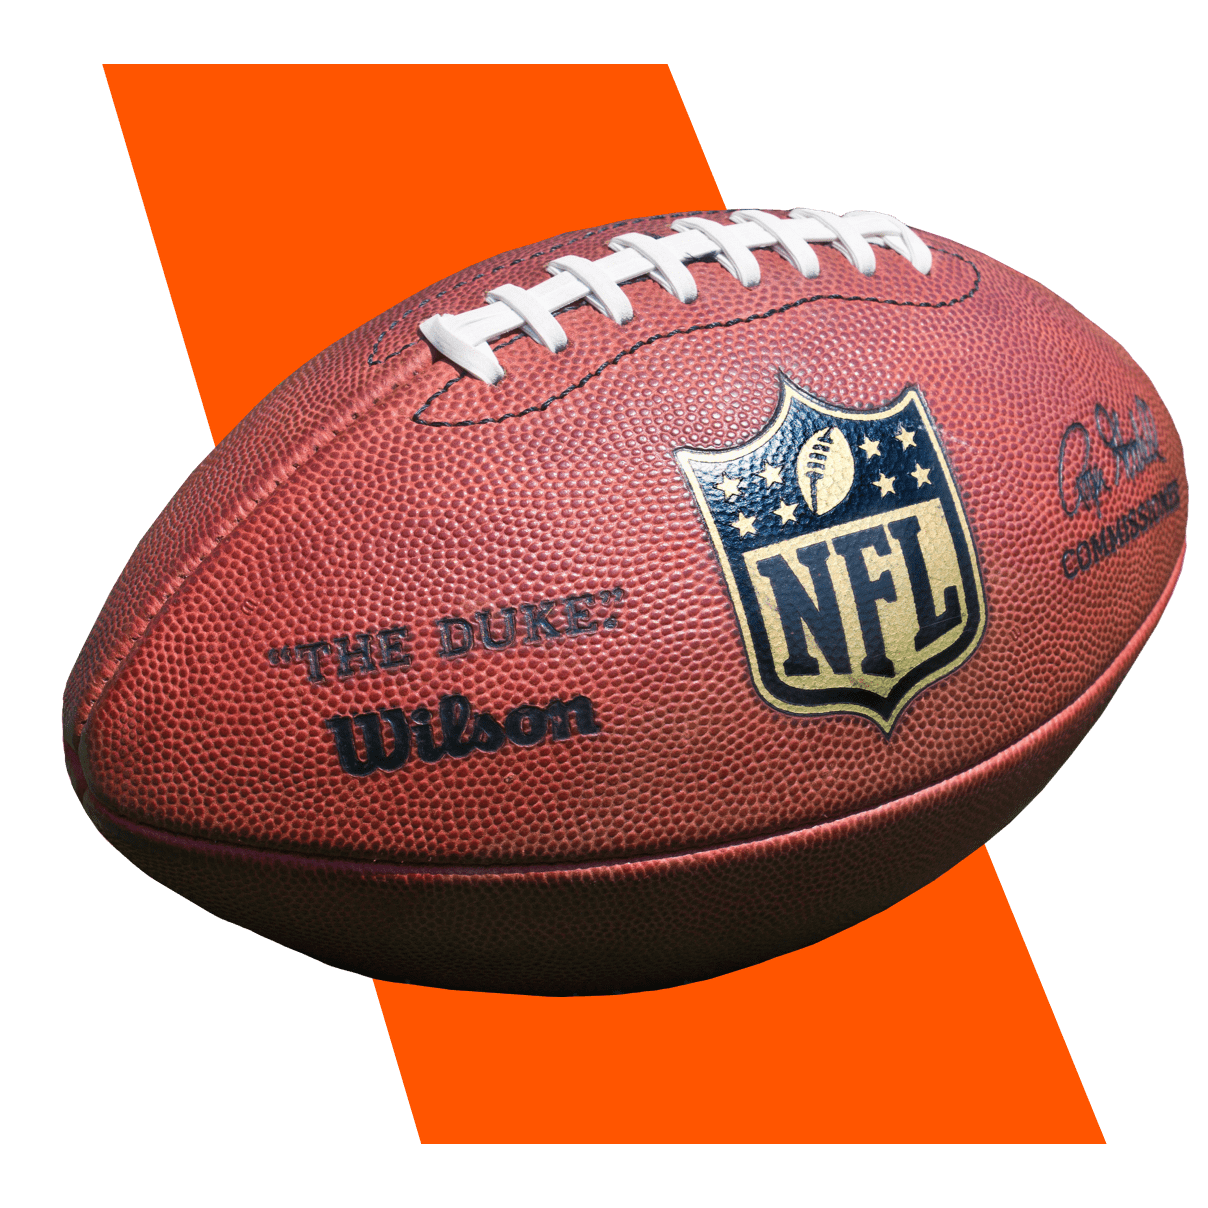 NFL Betting Sites - Top 5+ Sites to Bet on the NFL Online